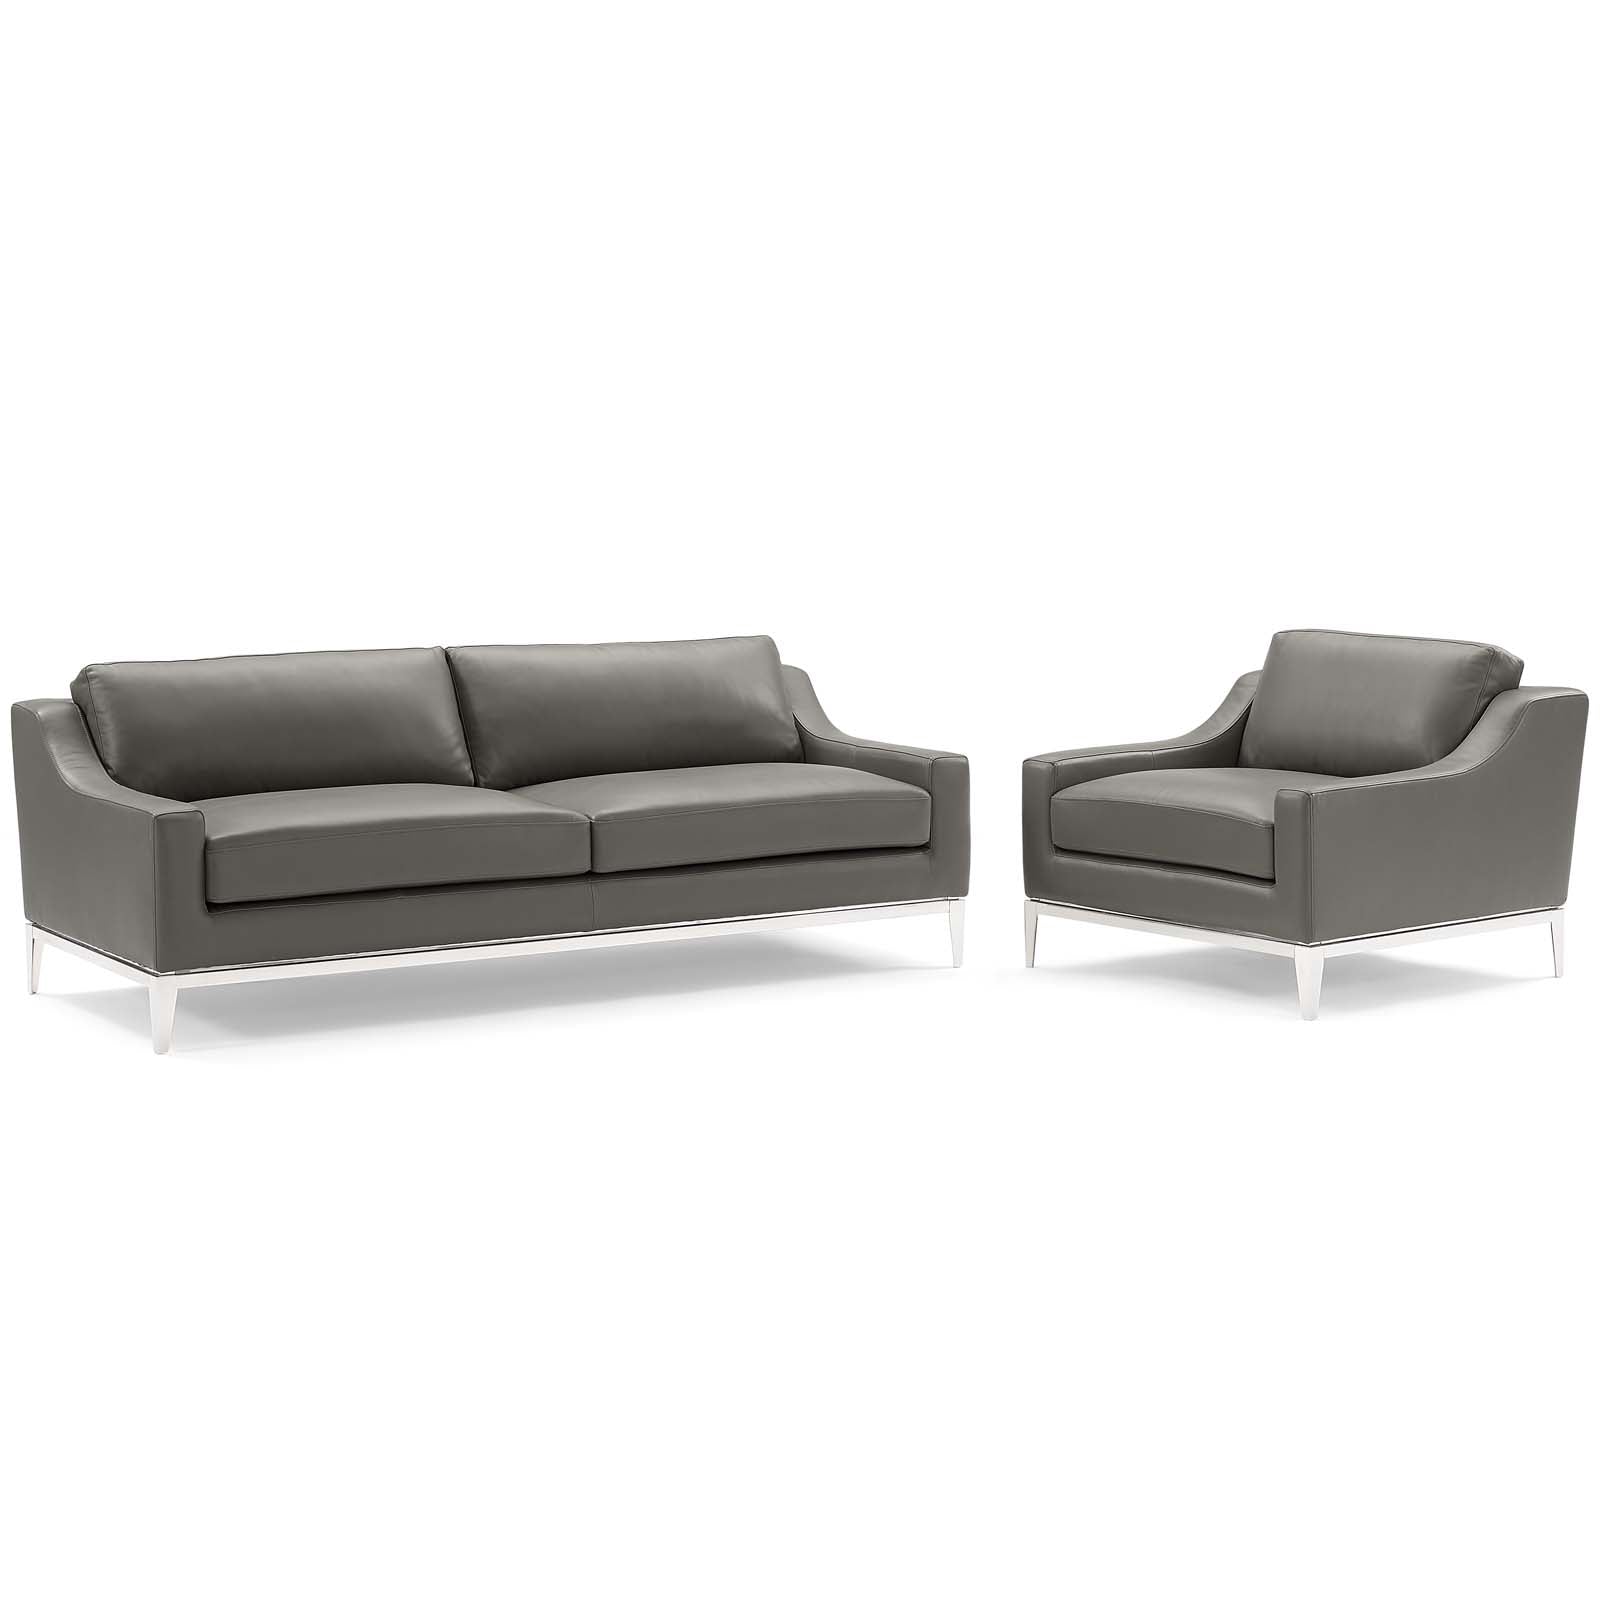 Harness Stainless Steel Base Leather Sofa & Armchair Set - East Shore Modern Home Furnishings